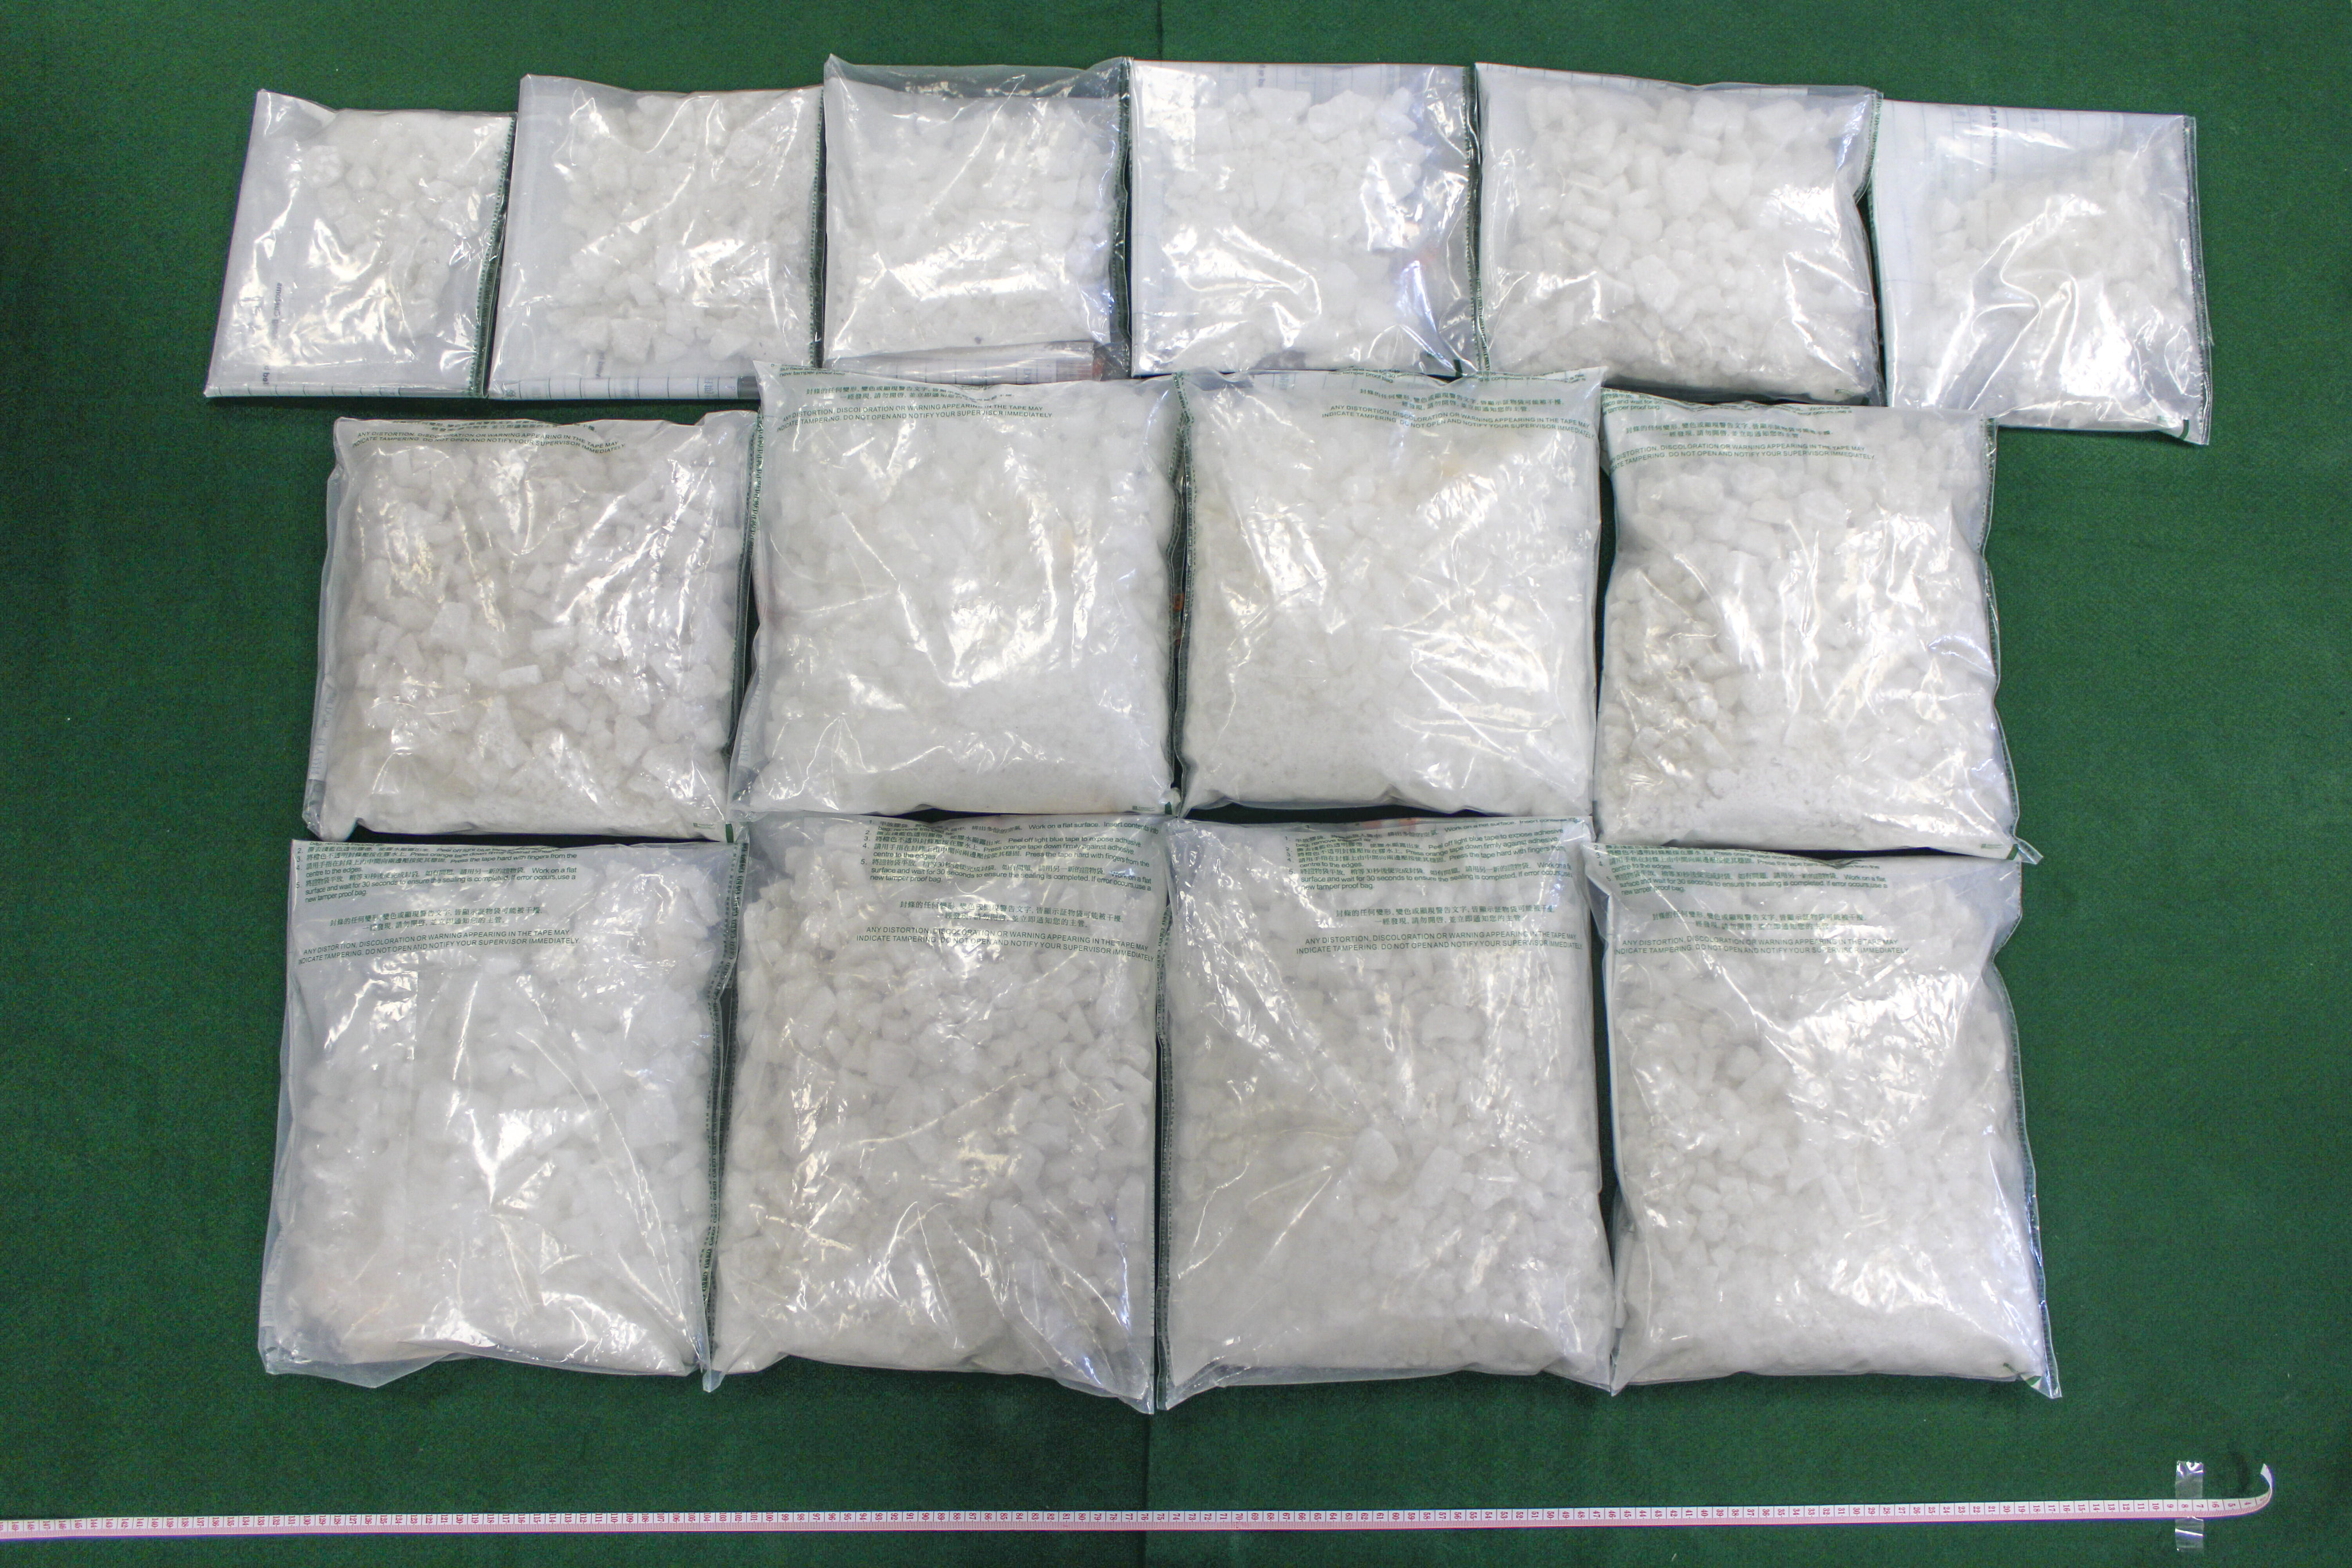 Hong Kong customs displays the ketamine worth HK$16 million found in driveshafts at the airport. Photo: Handout